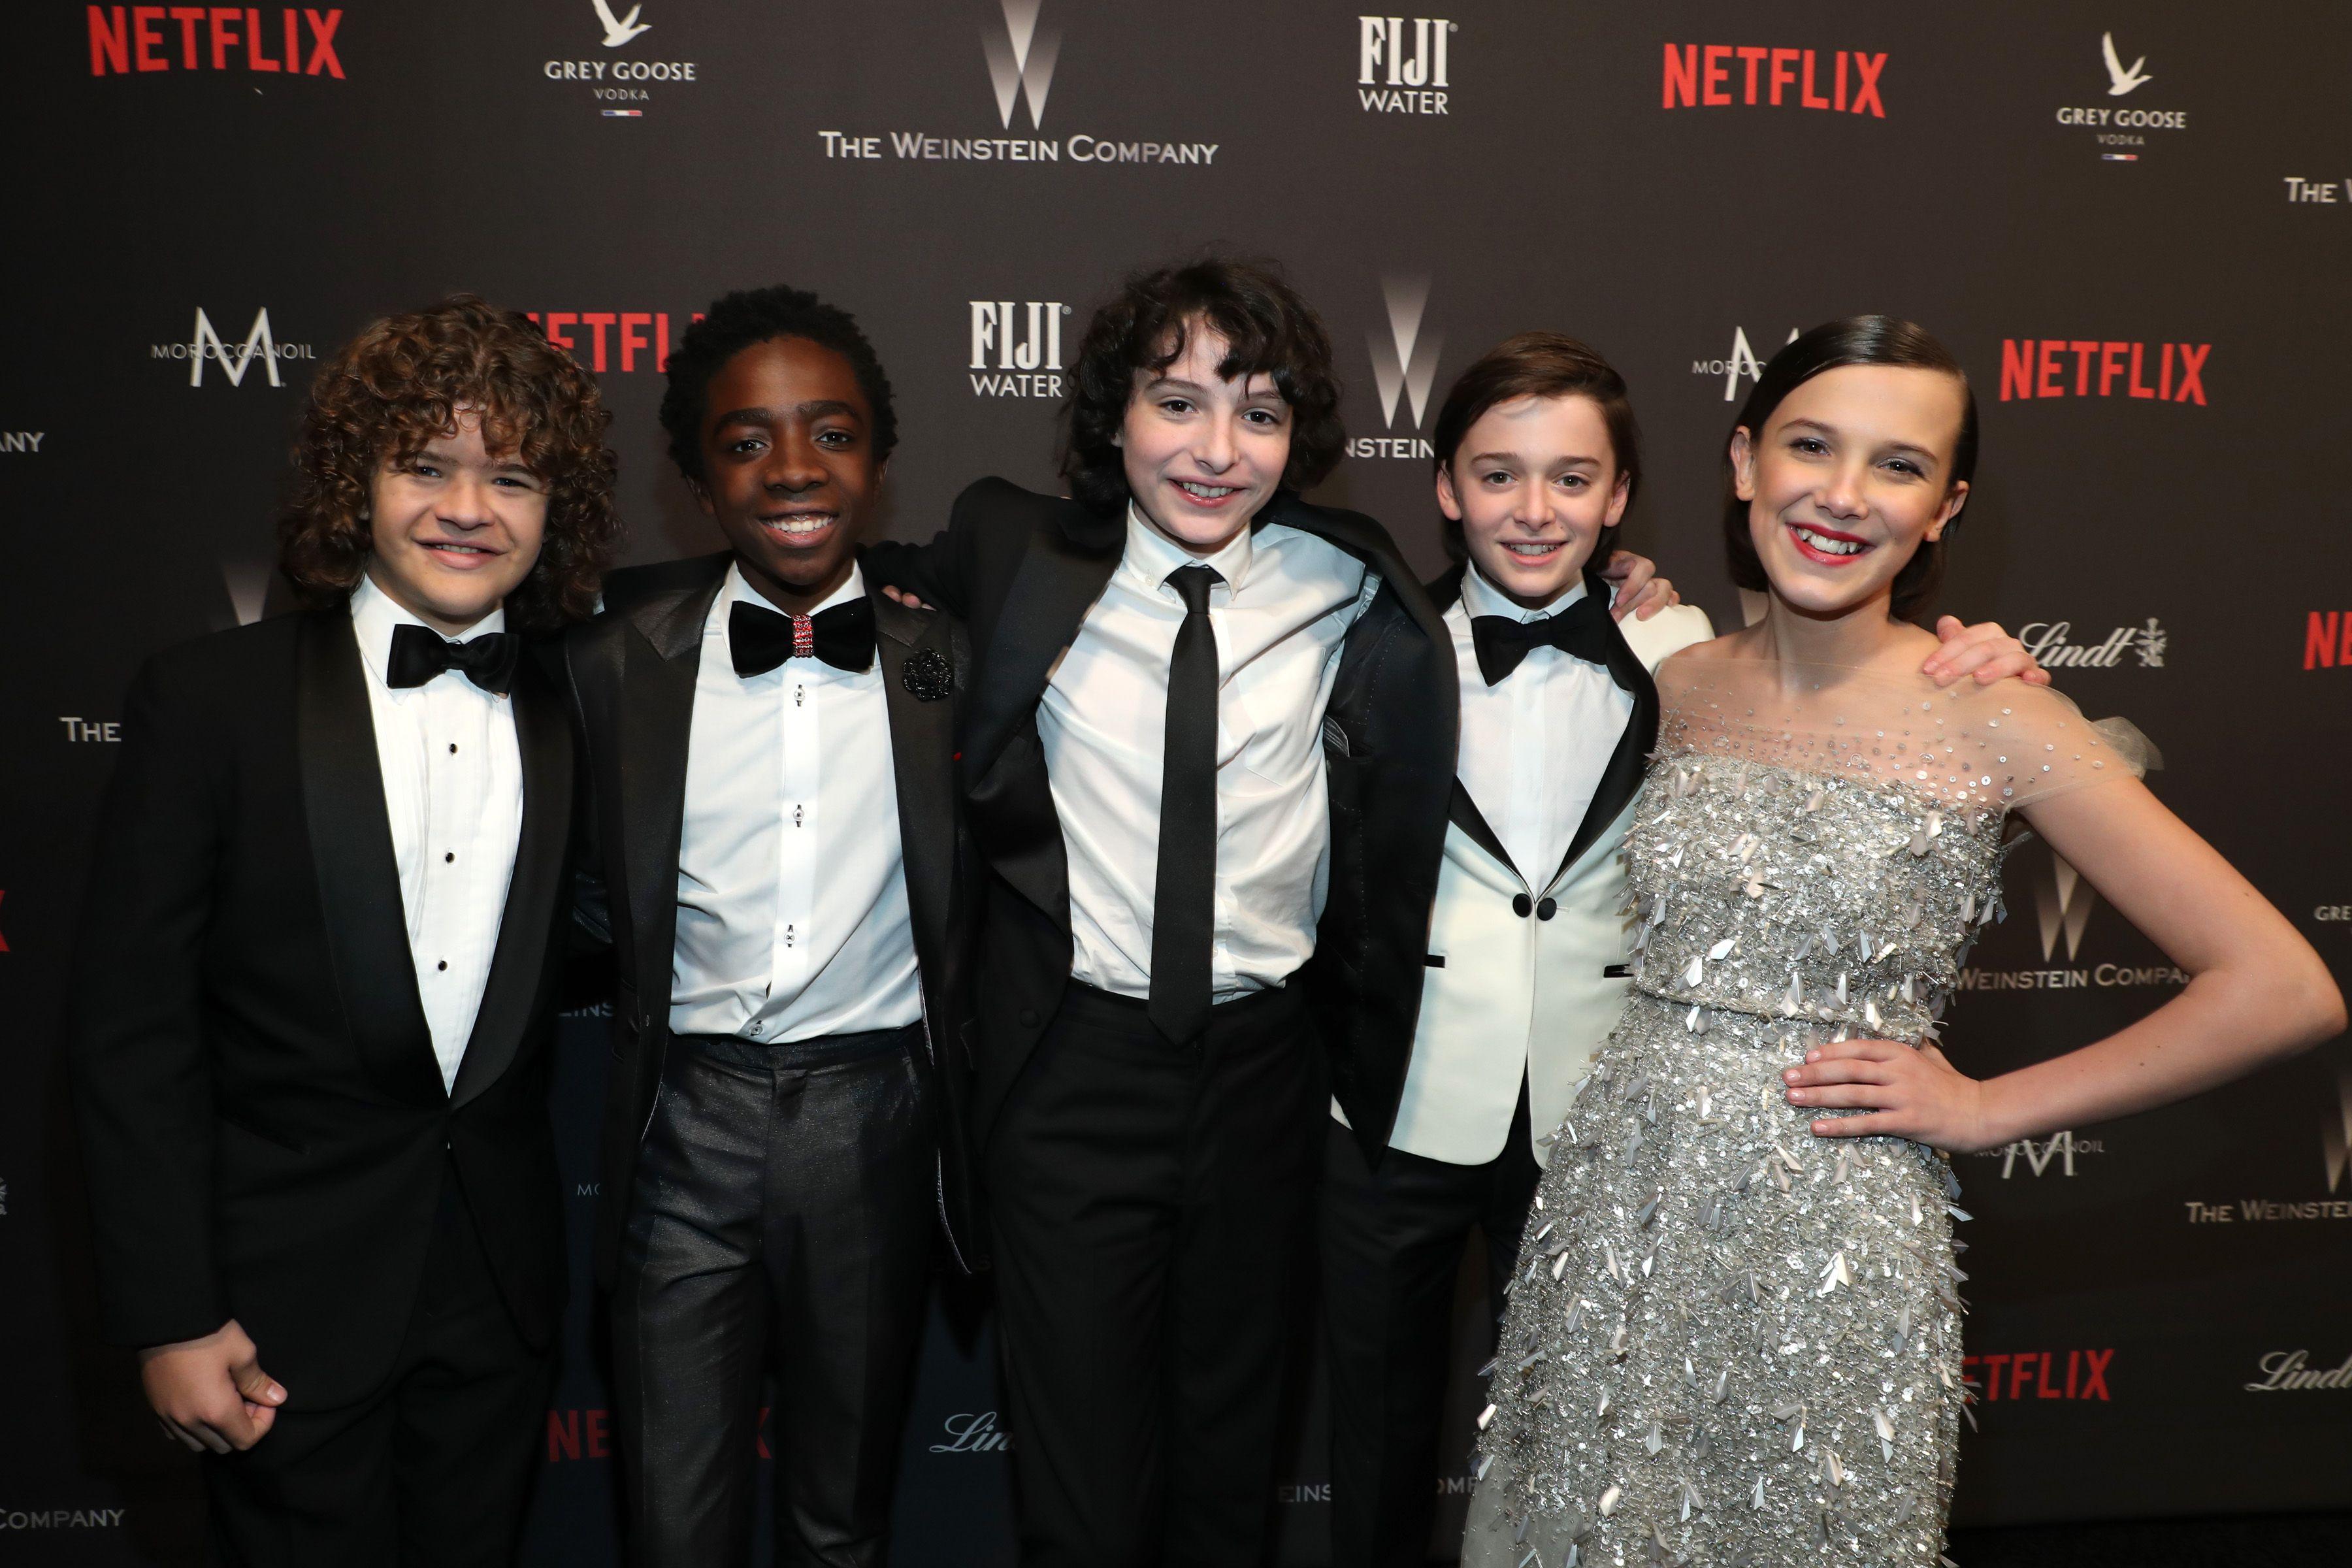 The Stranger Things cast on the red carpet their first award